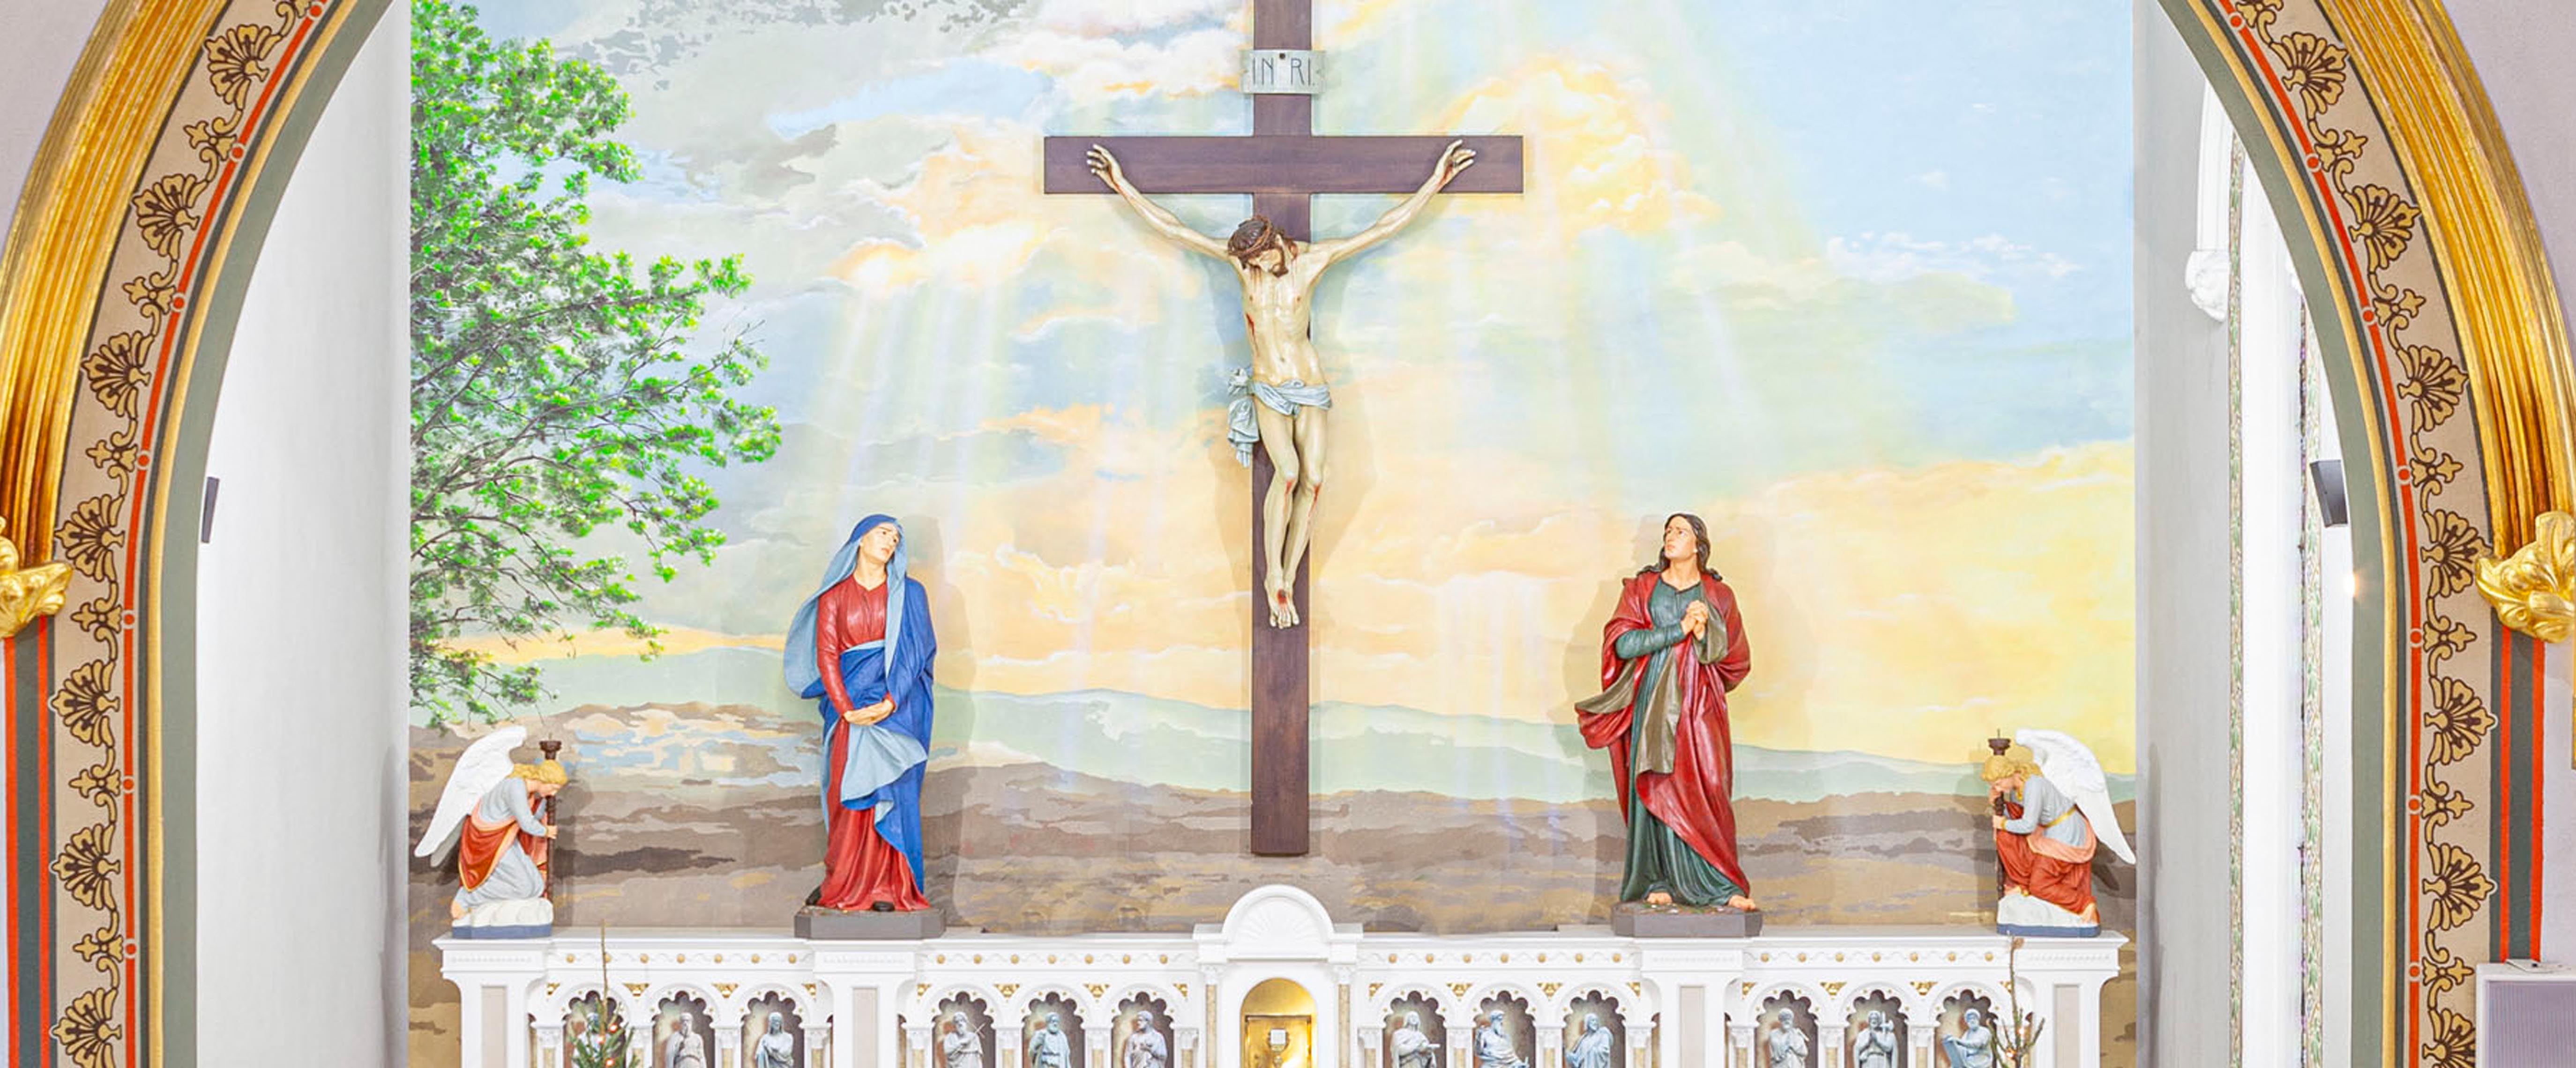 Crucifix scene at St. James on the altar